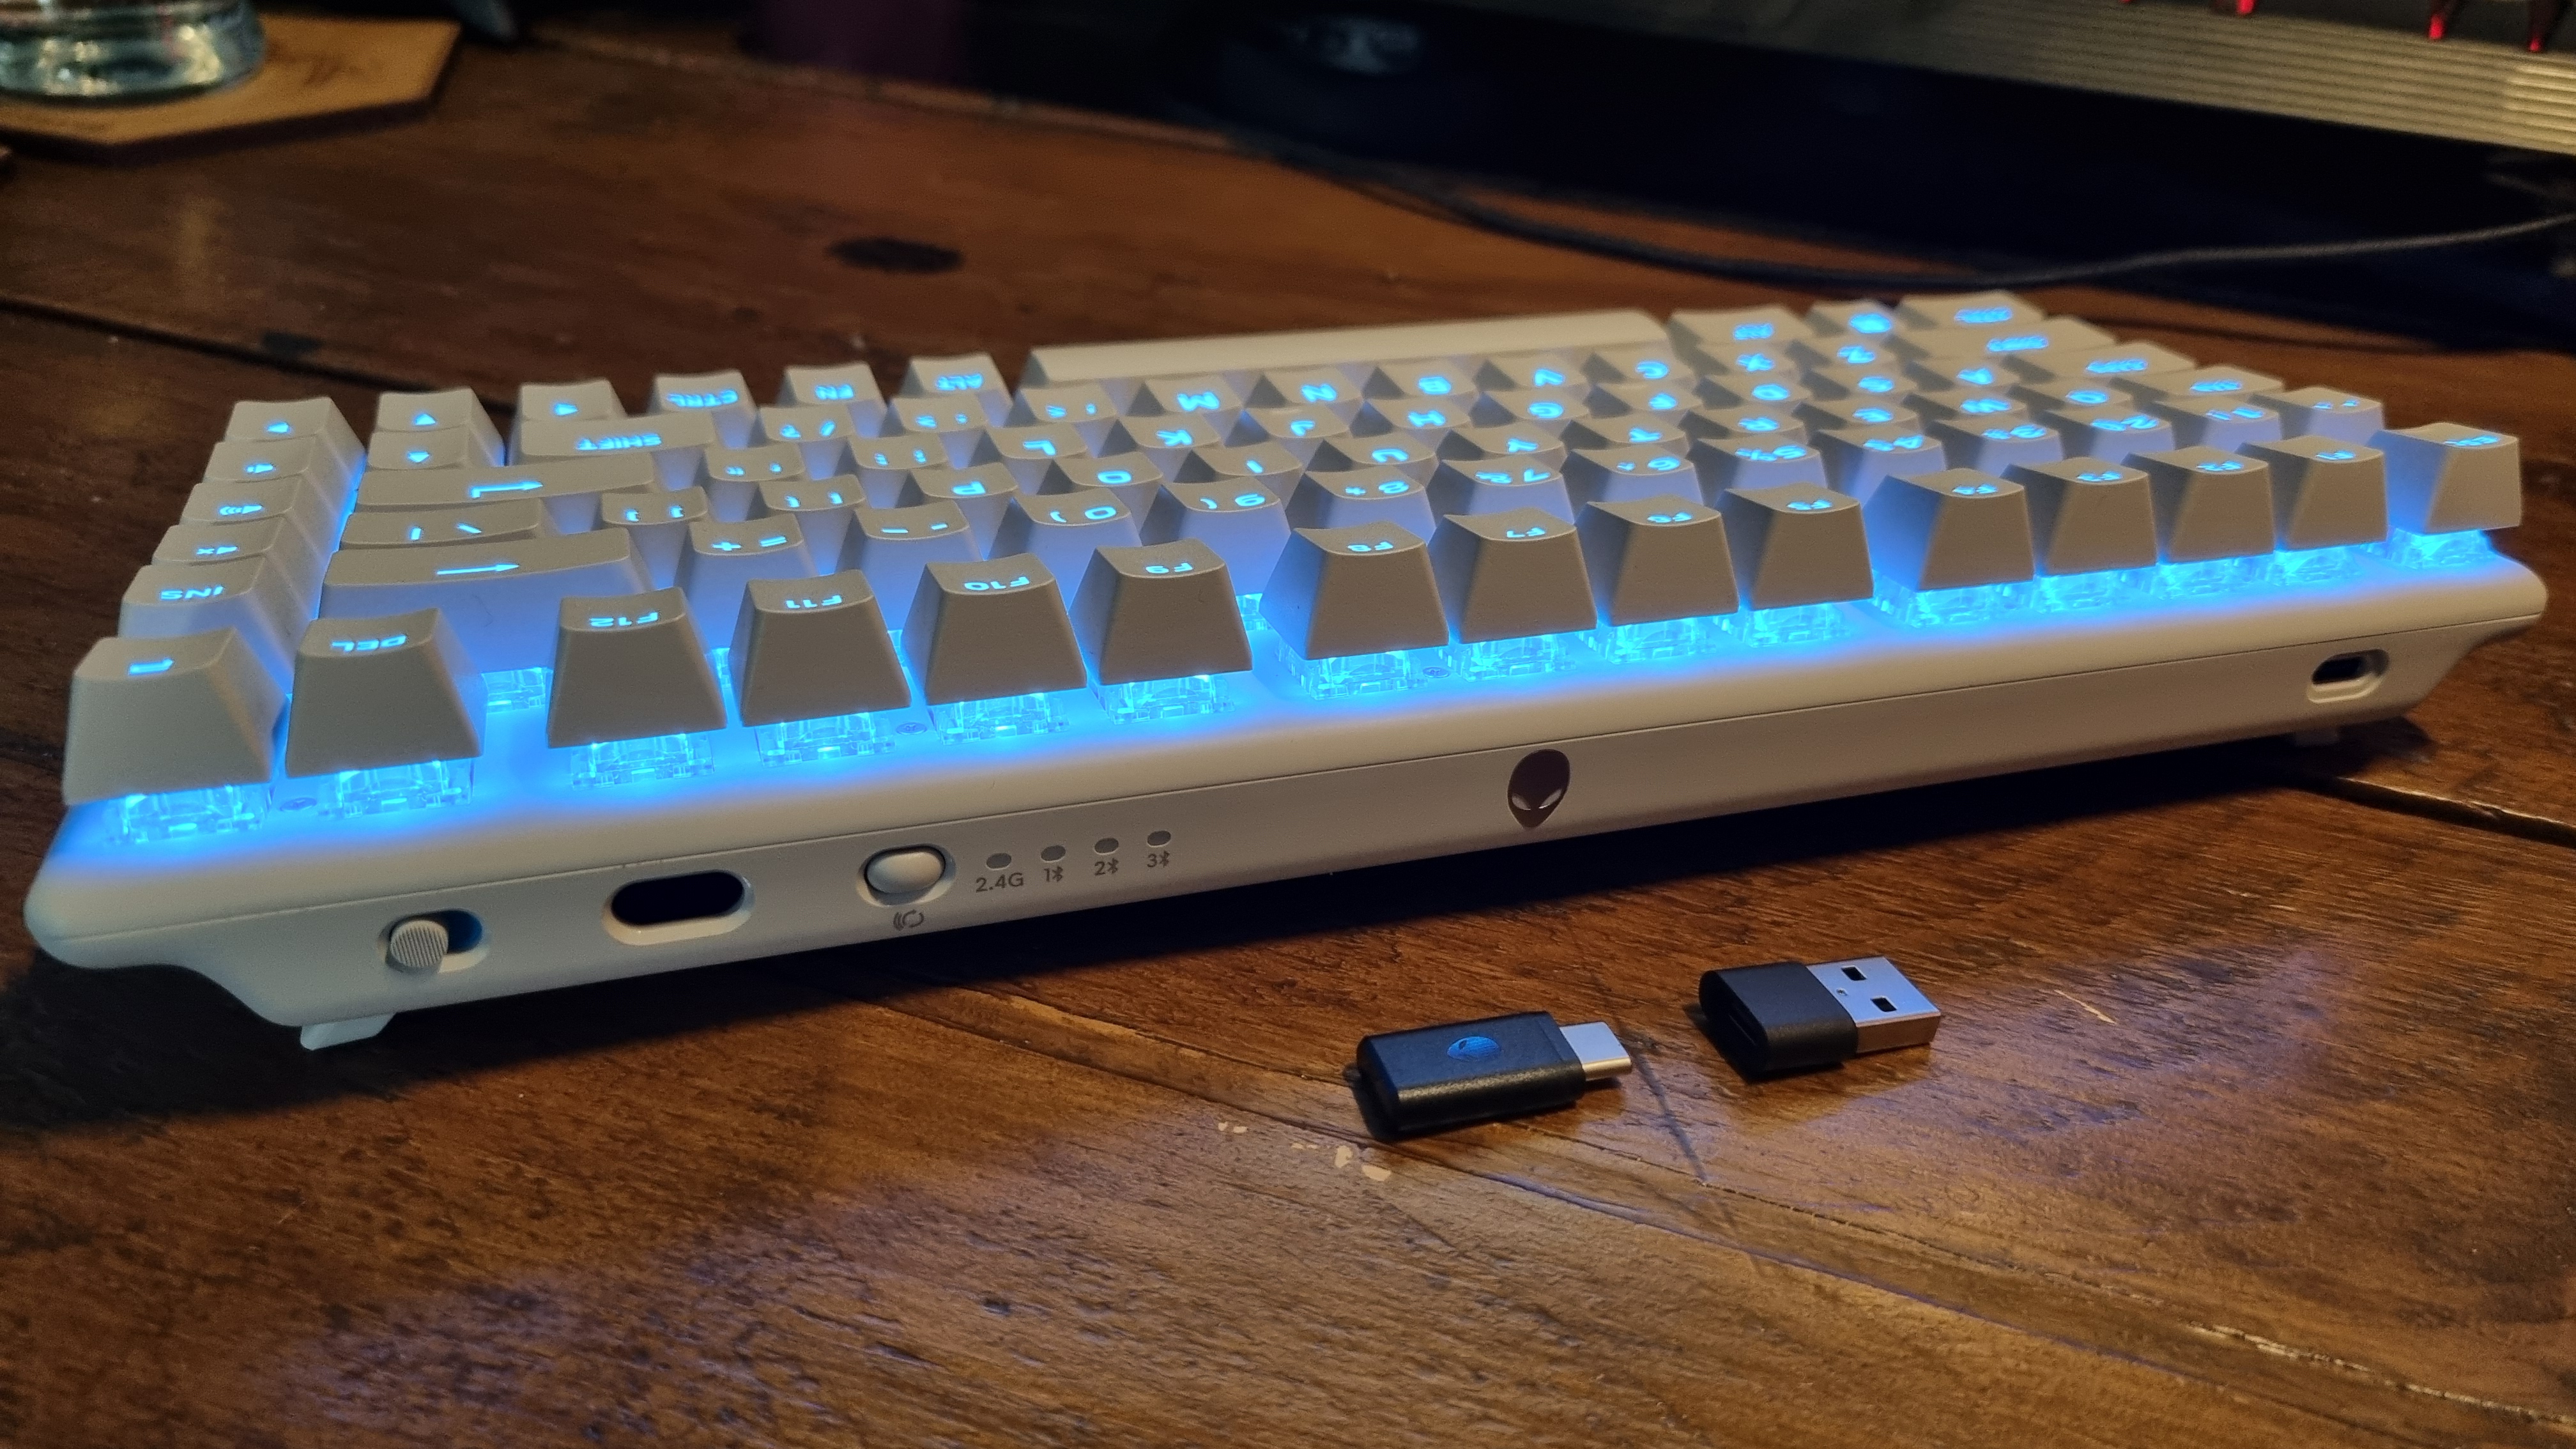 The rear of the Alienware Pro Wireless Gaming Keyboard, lit up in blue, showing the USB dongle slot and associated dongle and adaptor